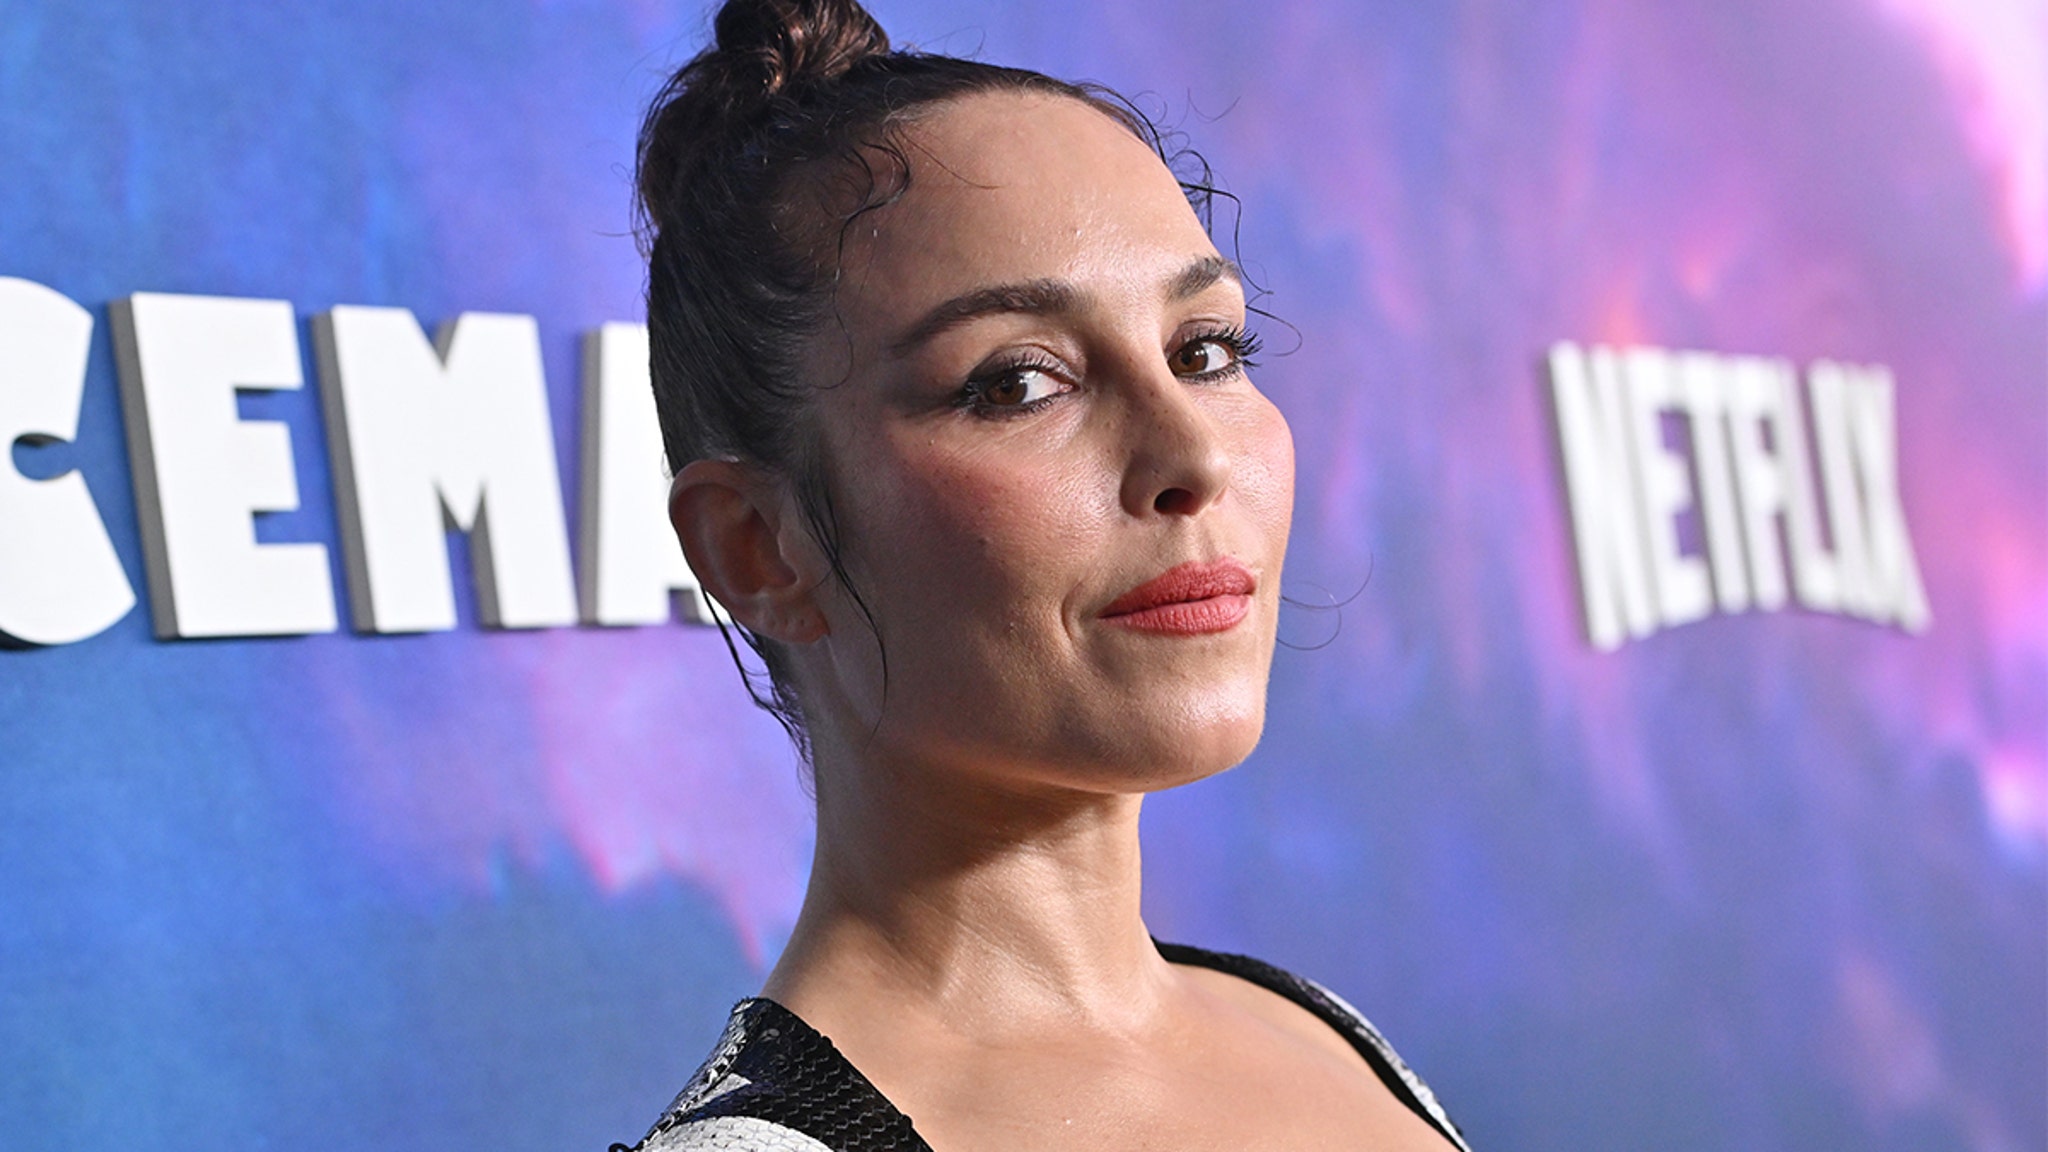 Noomi Rapace Reveals She Taught Herself to Read and Write at Age 12, 'Was Self-Raised Like Mowgli'